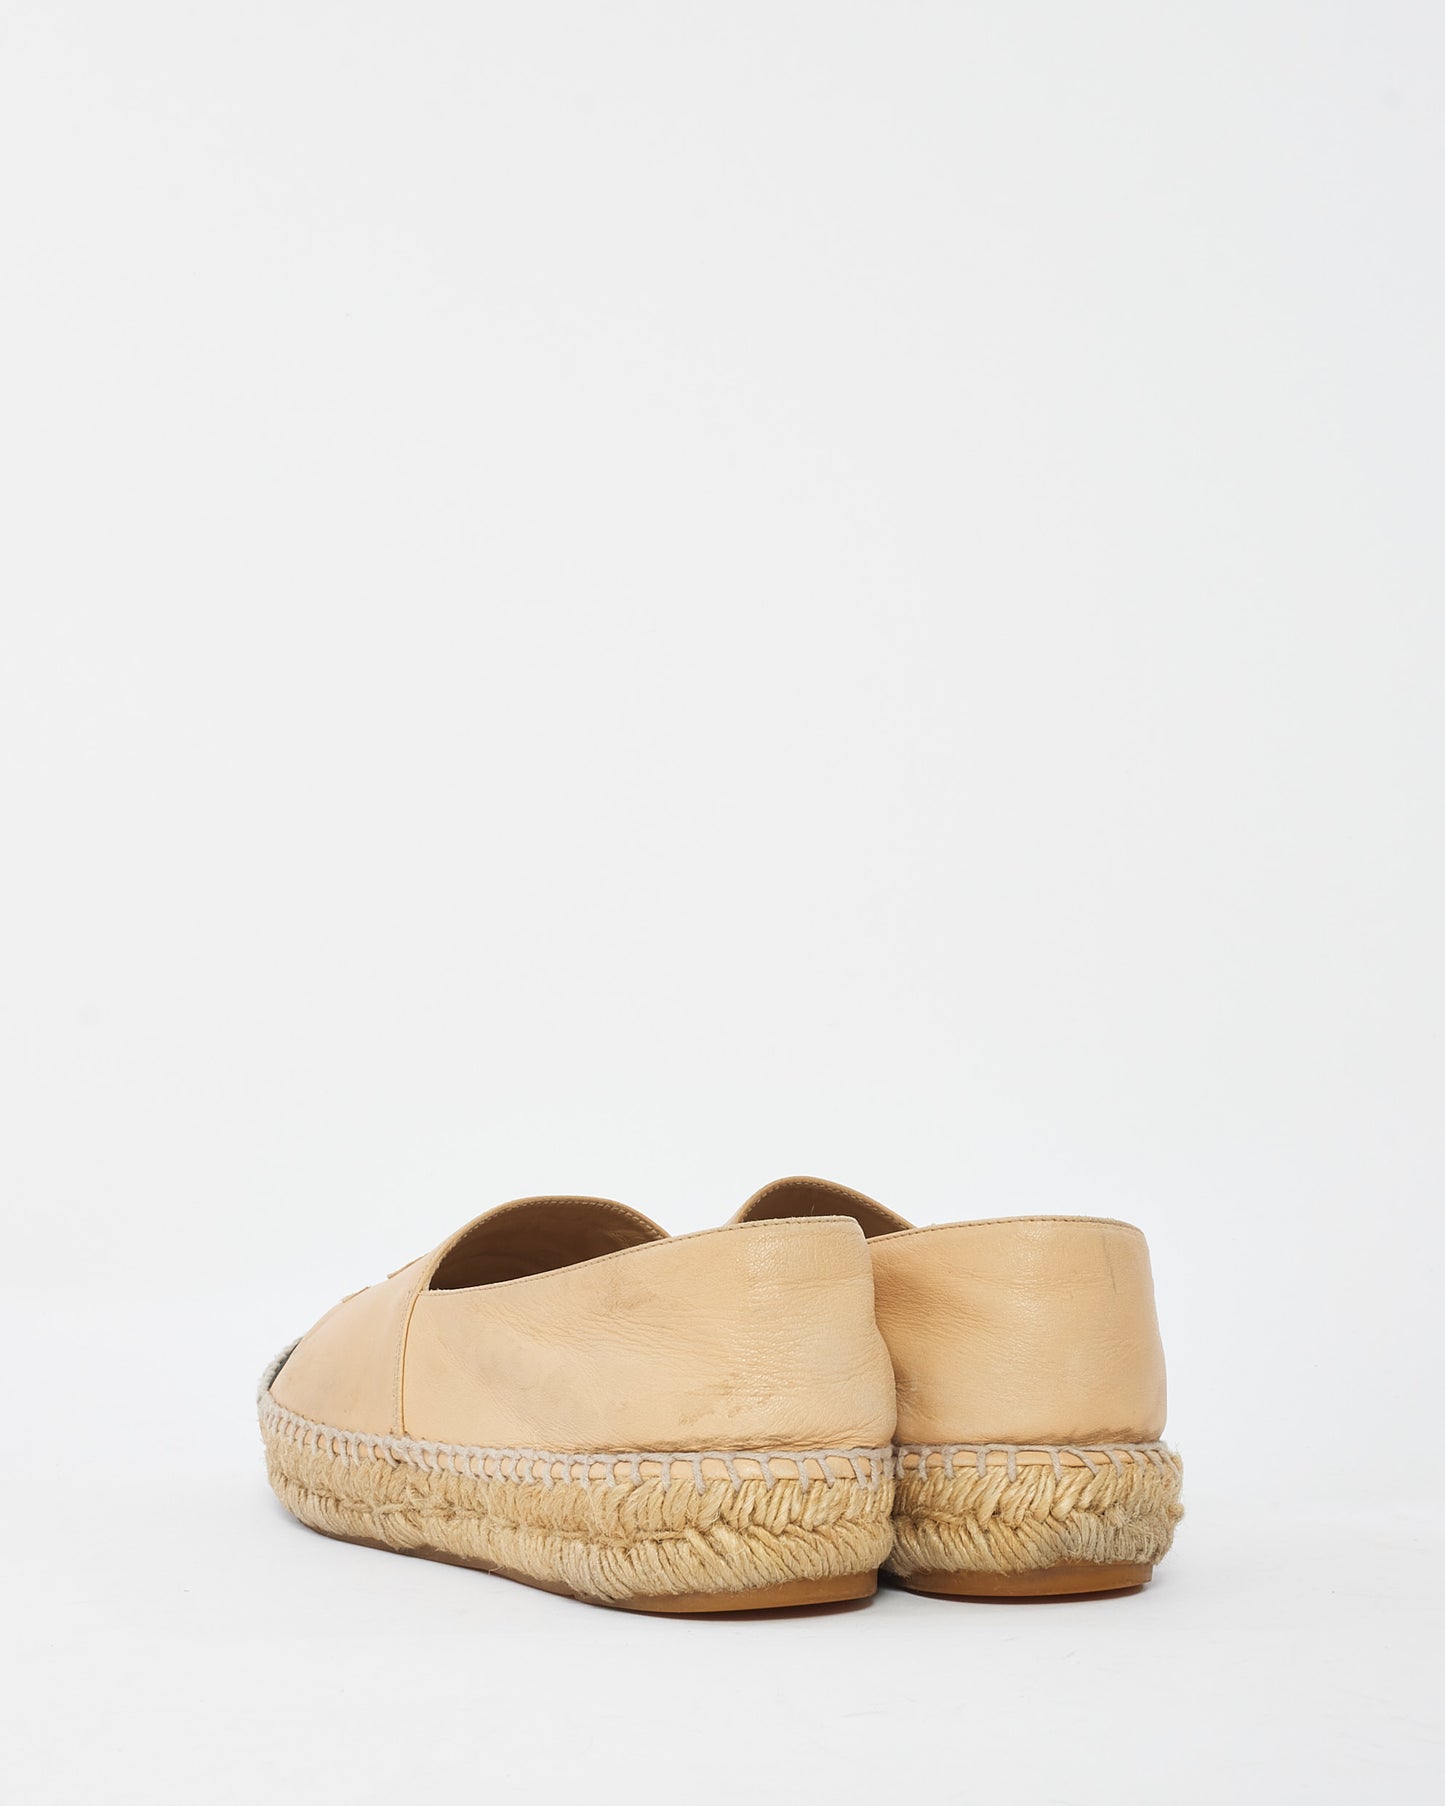 Chanel Beige Leather Espadrille Shoes - 40